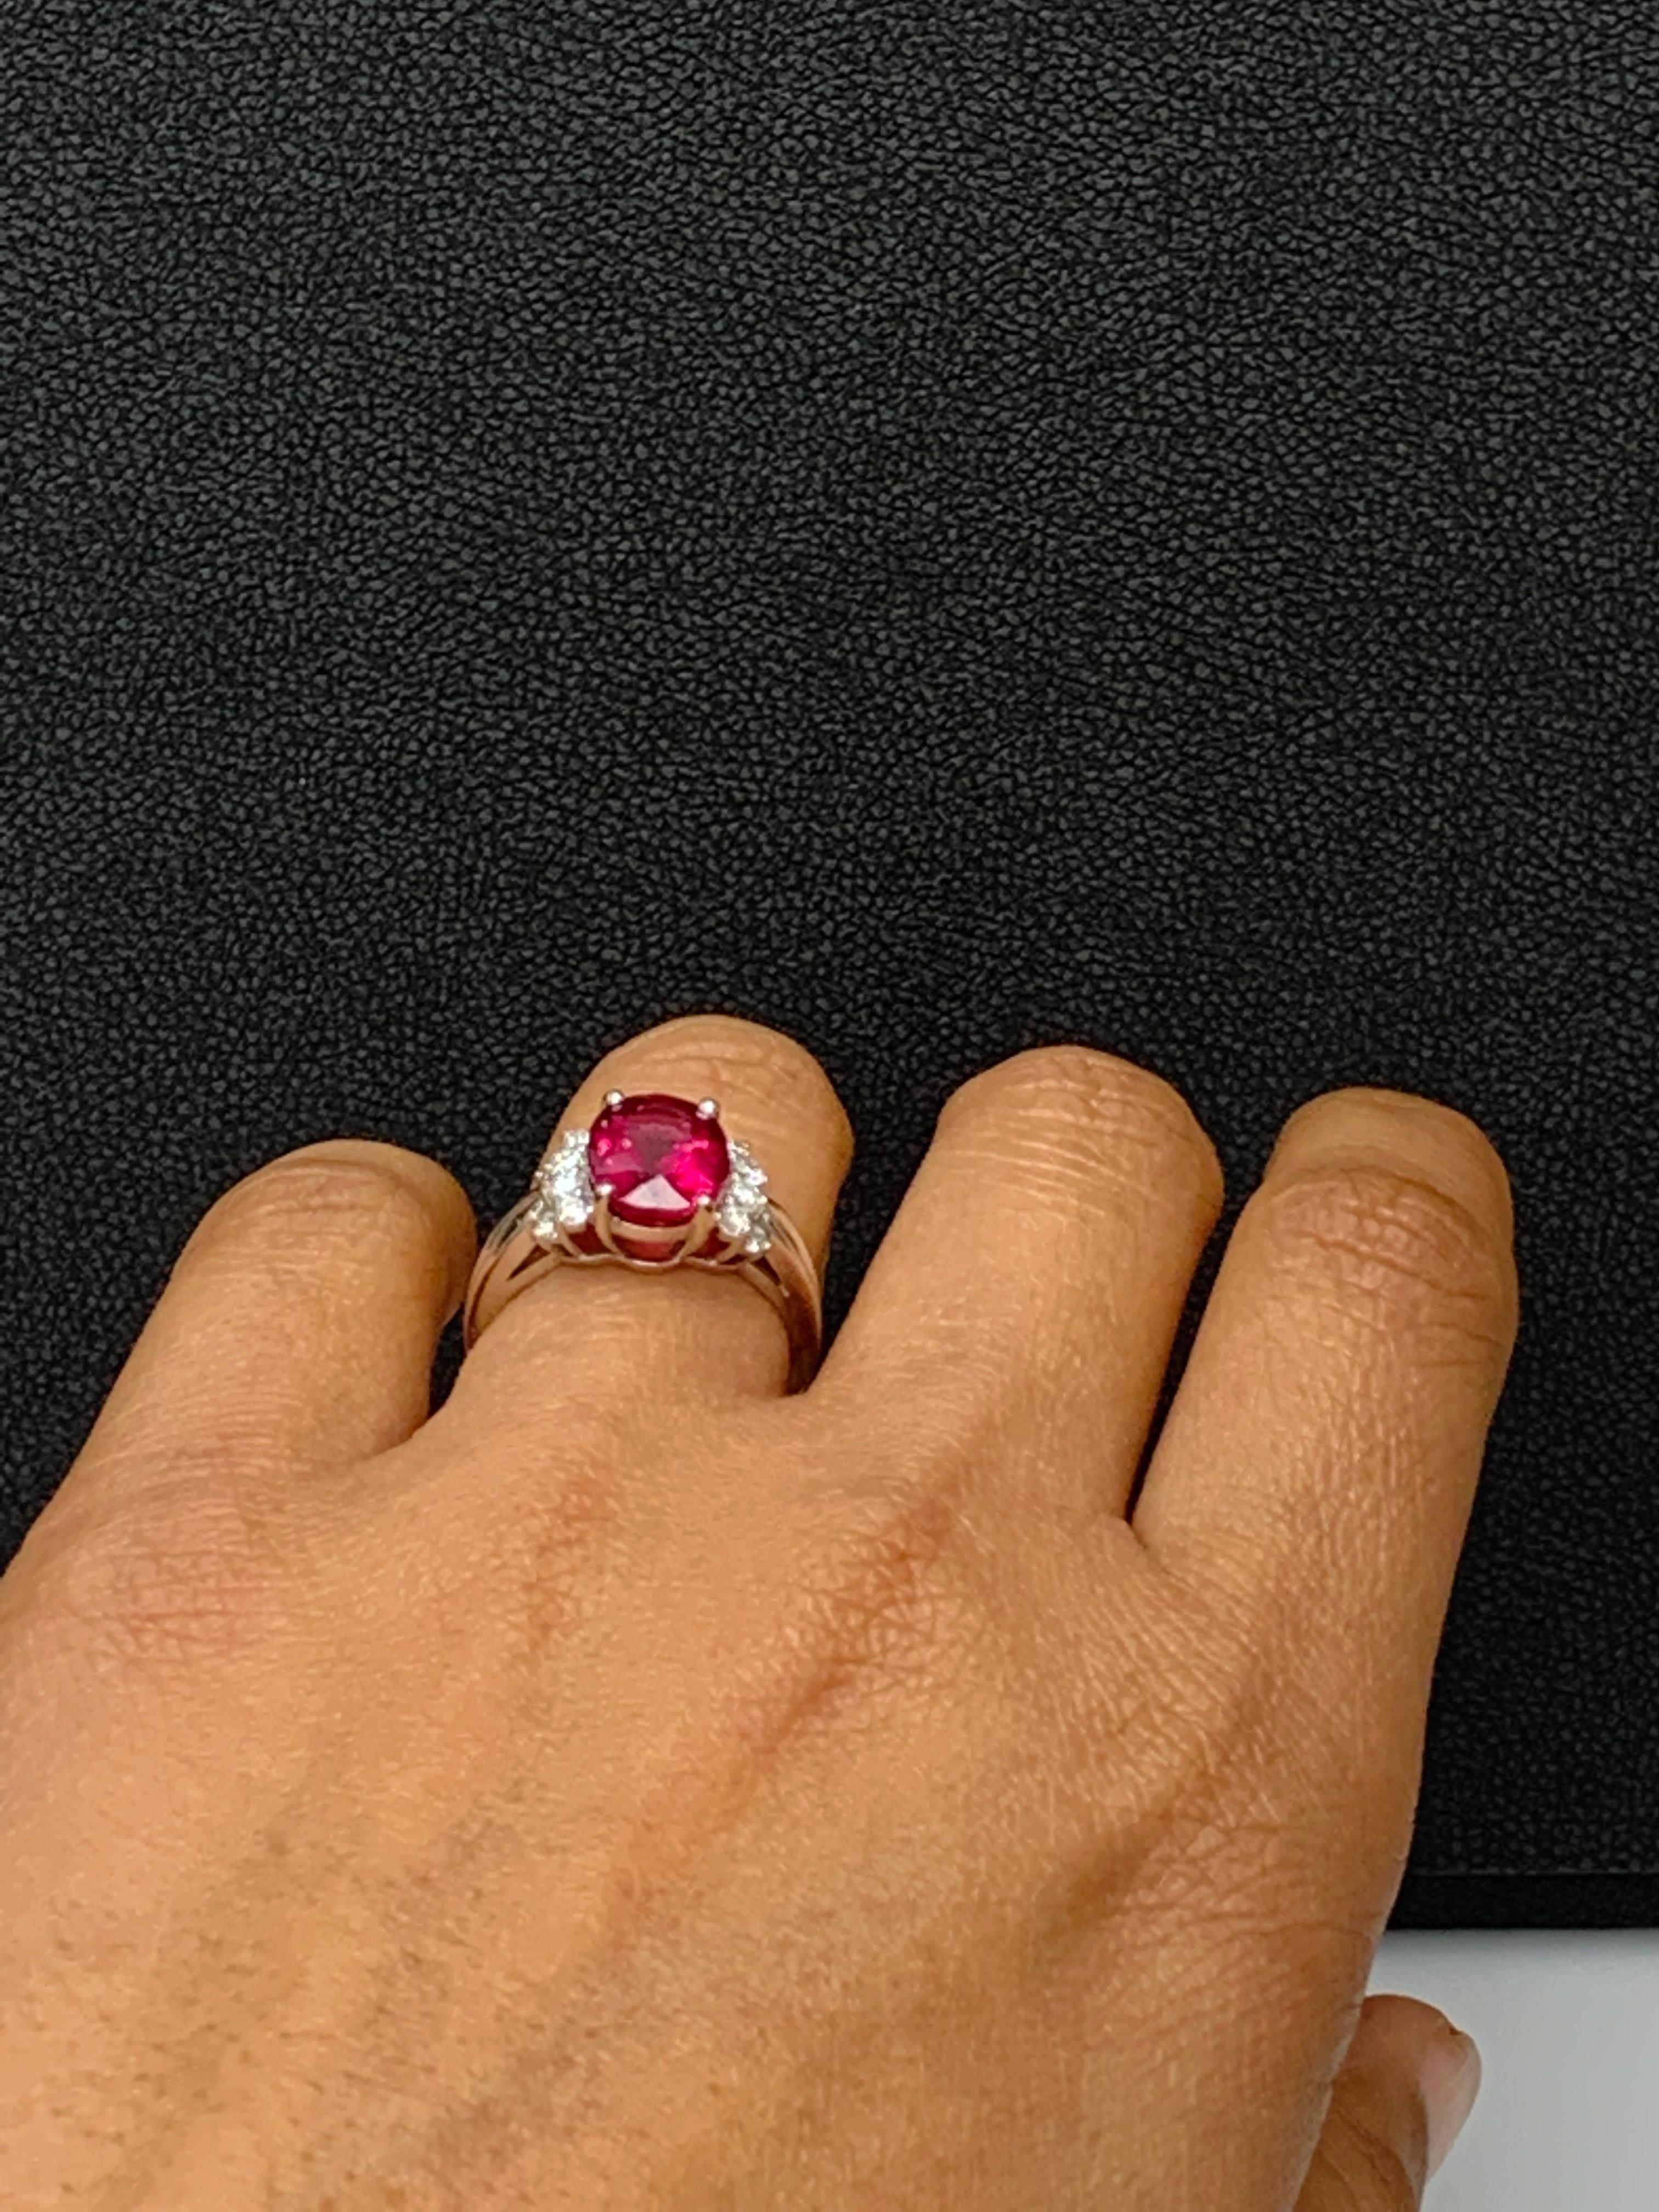 2.80 Carat Oval Cut Pink Tourmaline and Diamond Ring in 18K White Gold For Sale 8